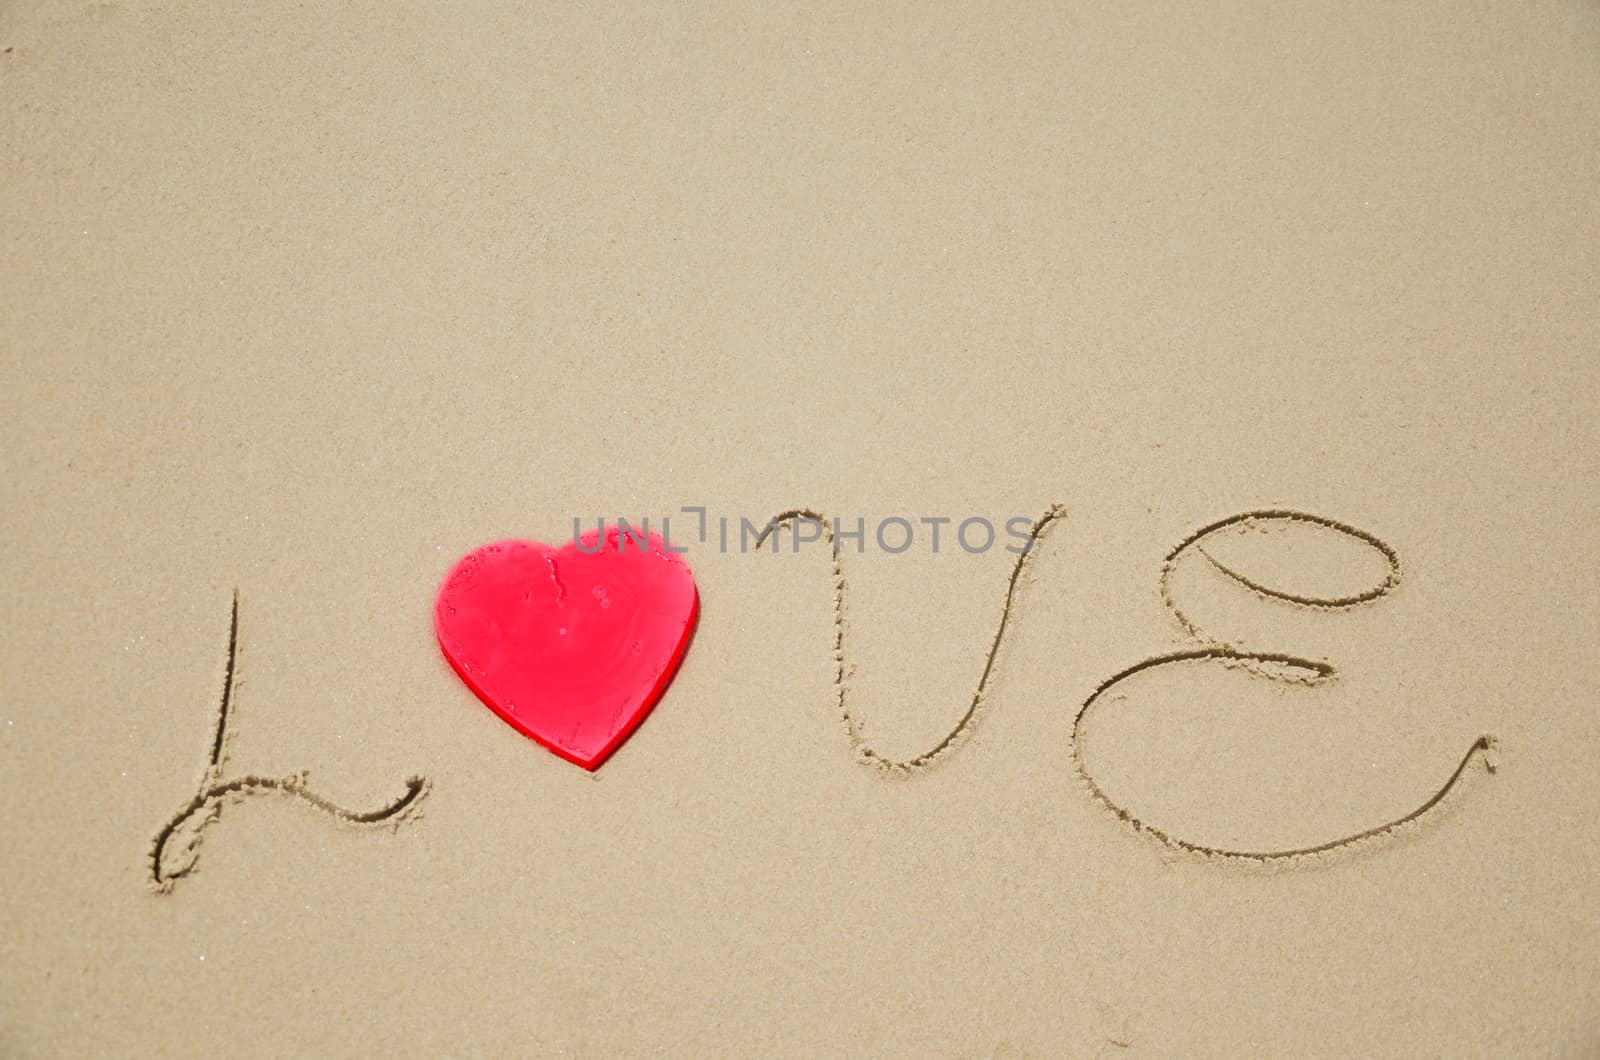 Sign "Love" with red heart shape on the sandy beach